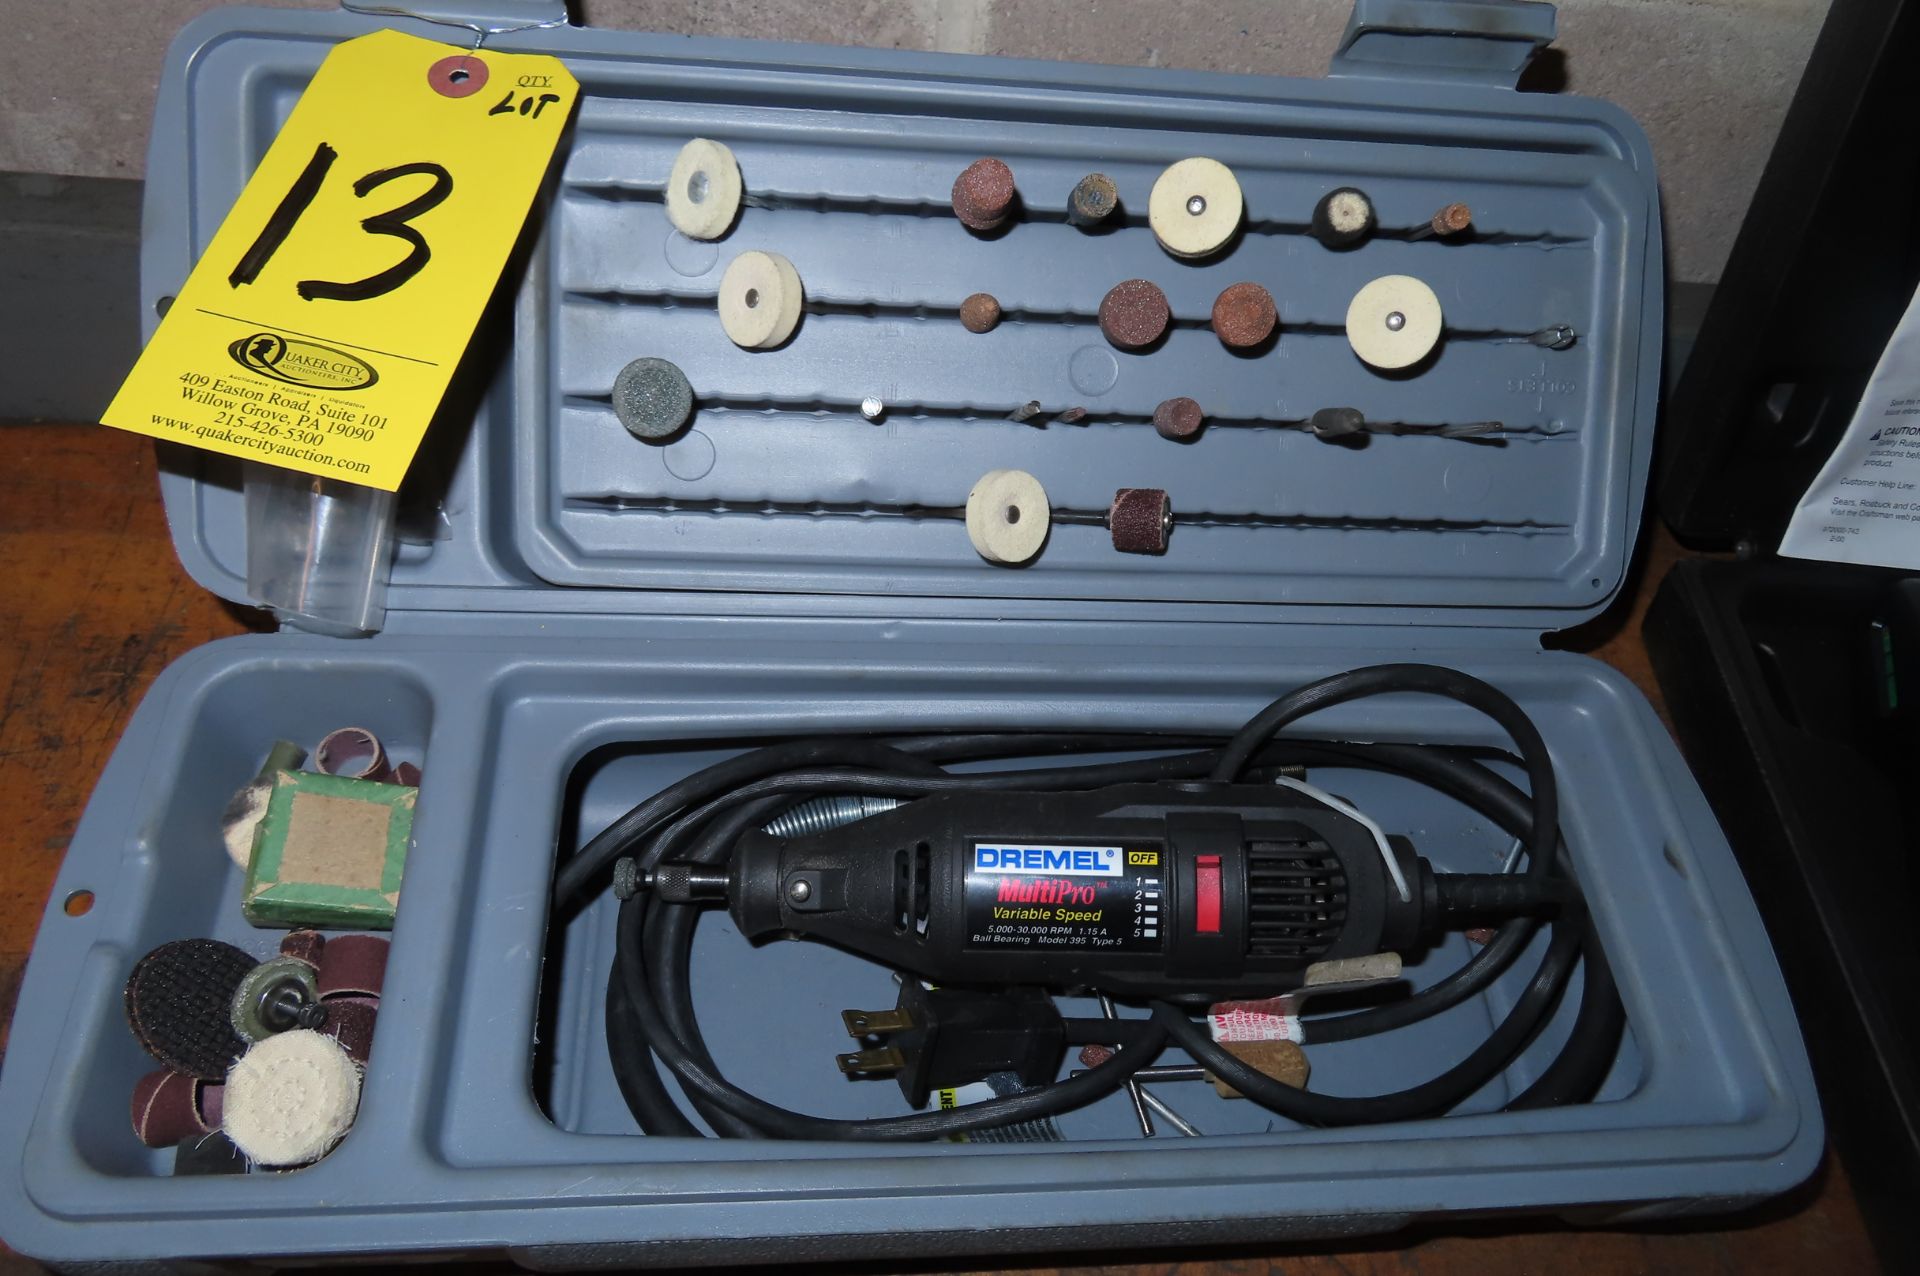 DREMEL MULTIPRO VARIABLE SPEED MDL 395 TOOL WITH 225T2 FLEX SHAFT AND ASSORTED ACCESSORIES - Image 3 of 4